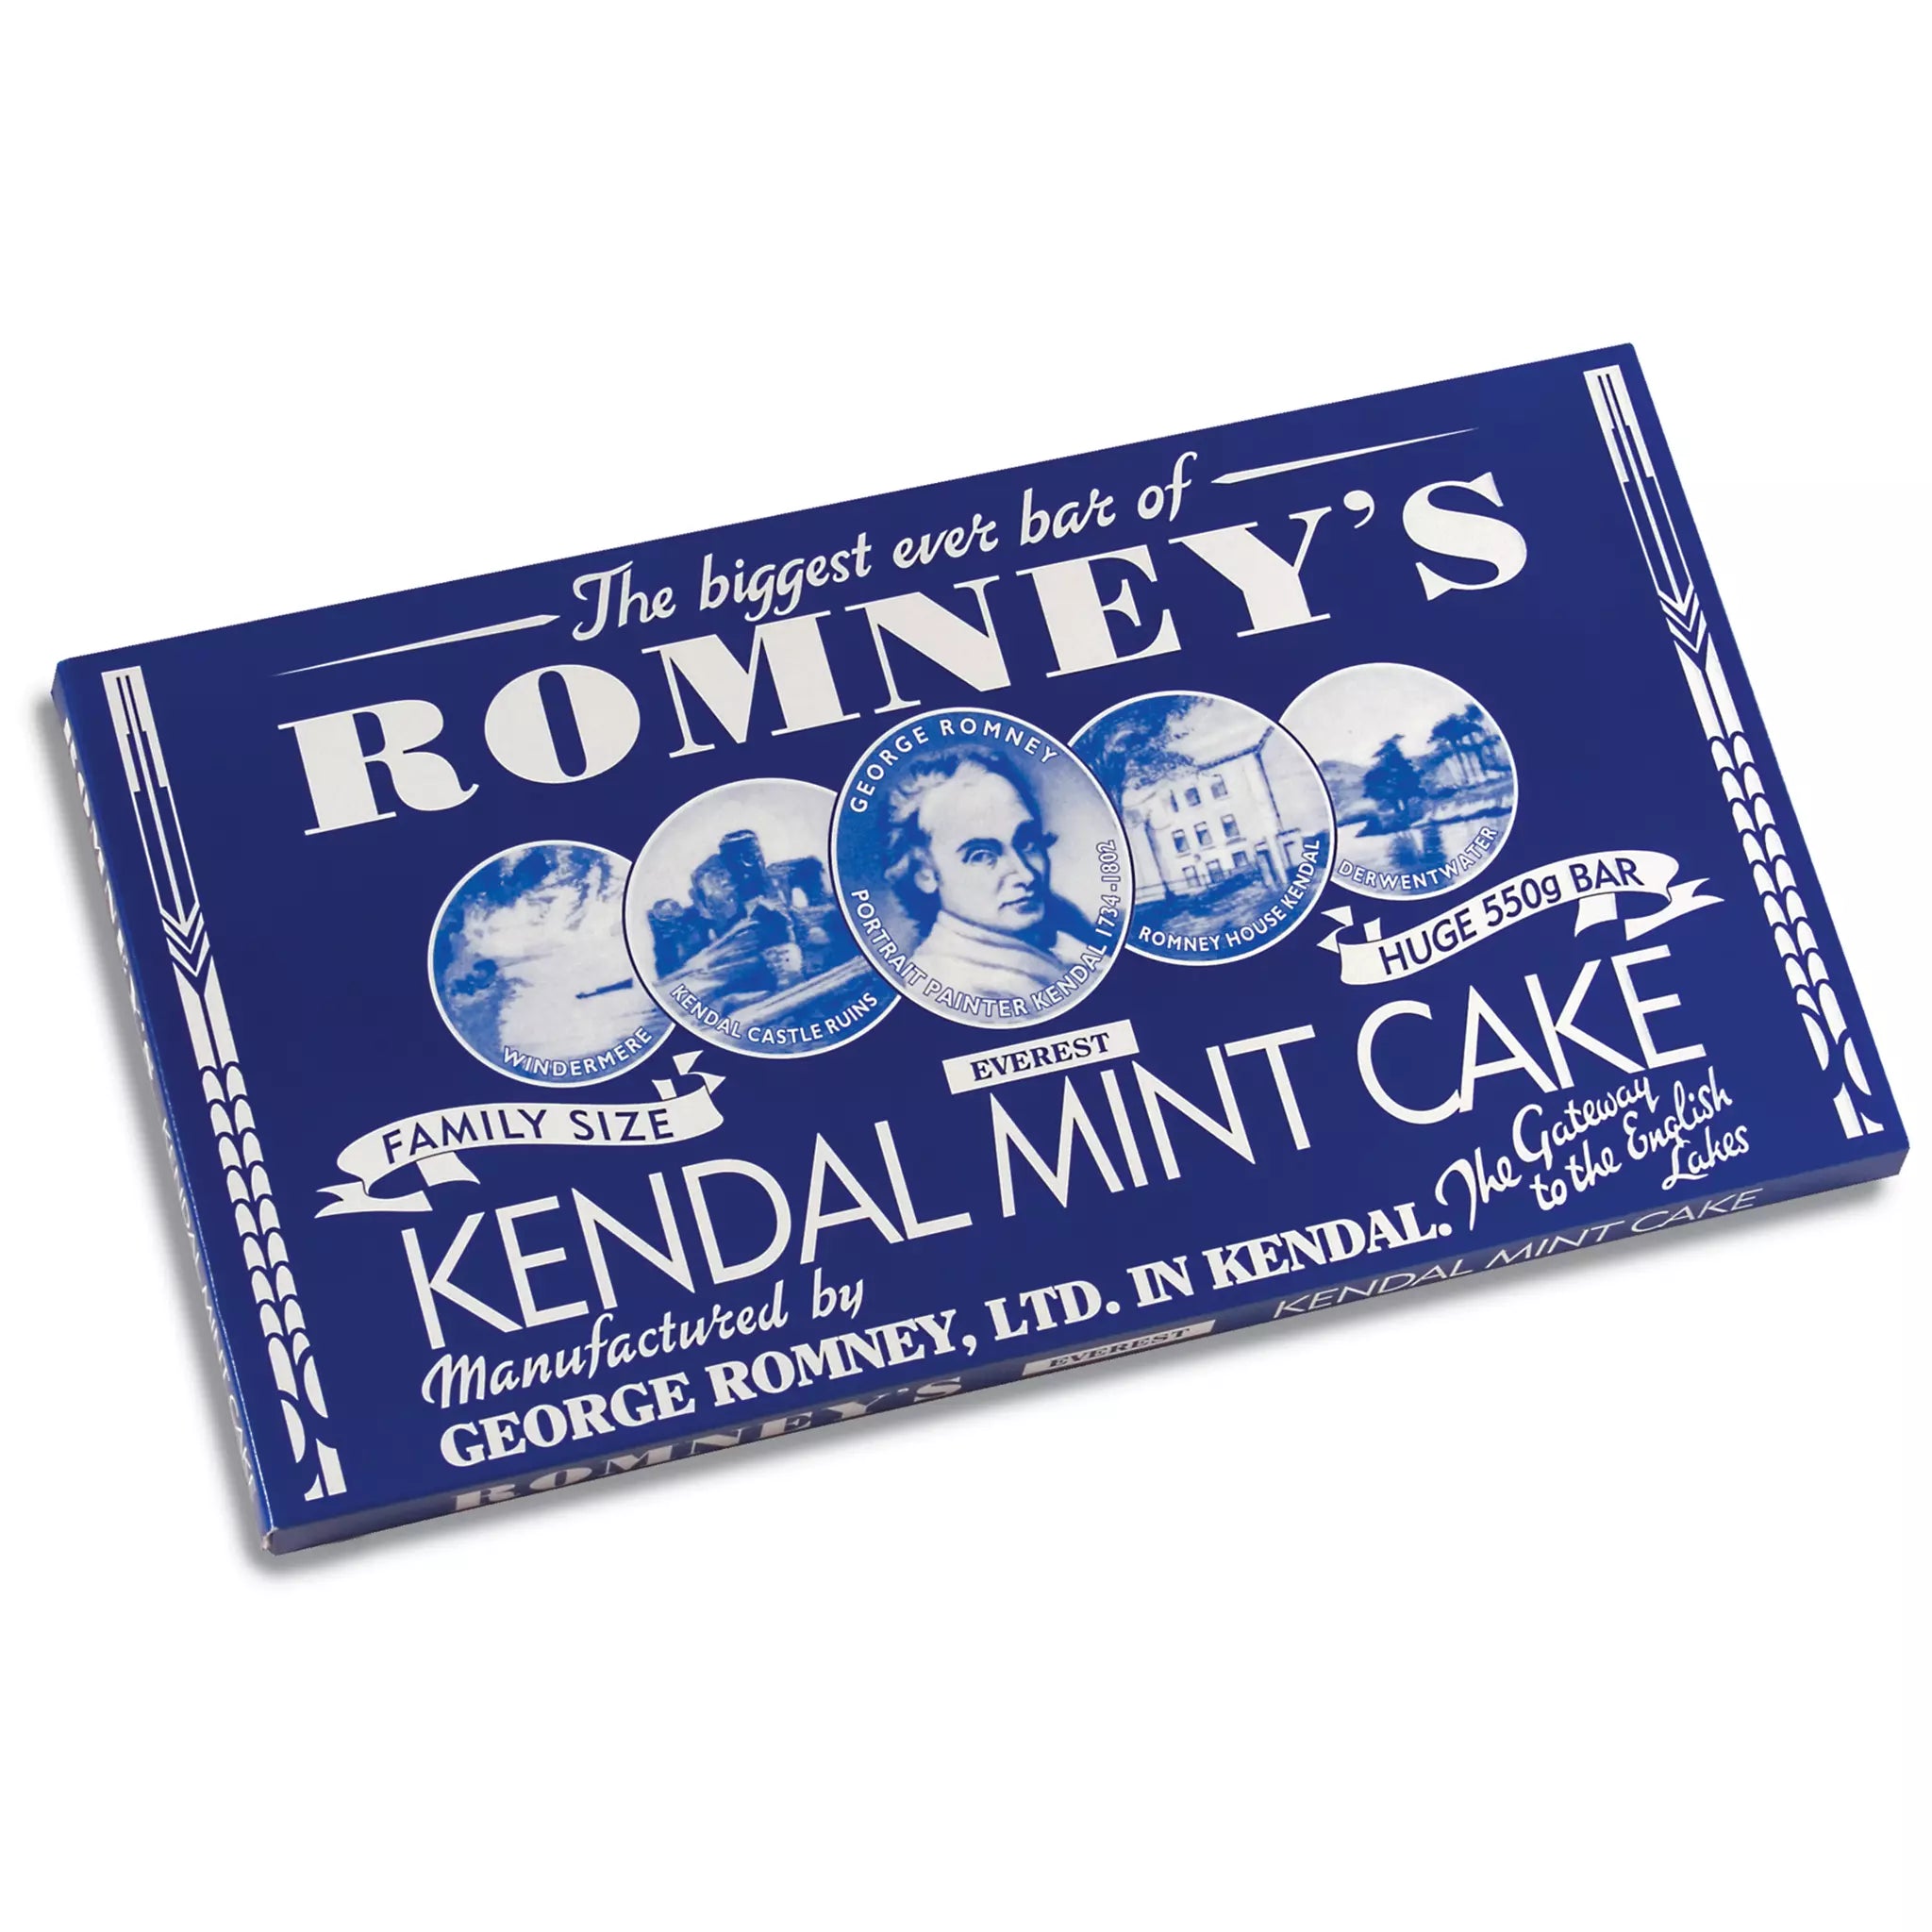 A rectangular bar of 550g Romney's Kendal Mint Cake in a blue and white cardboard box. It features the Romney's logo and words 'Romney's Kendal Mint Cake' in white on the front